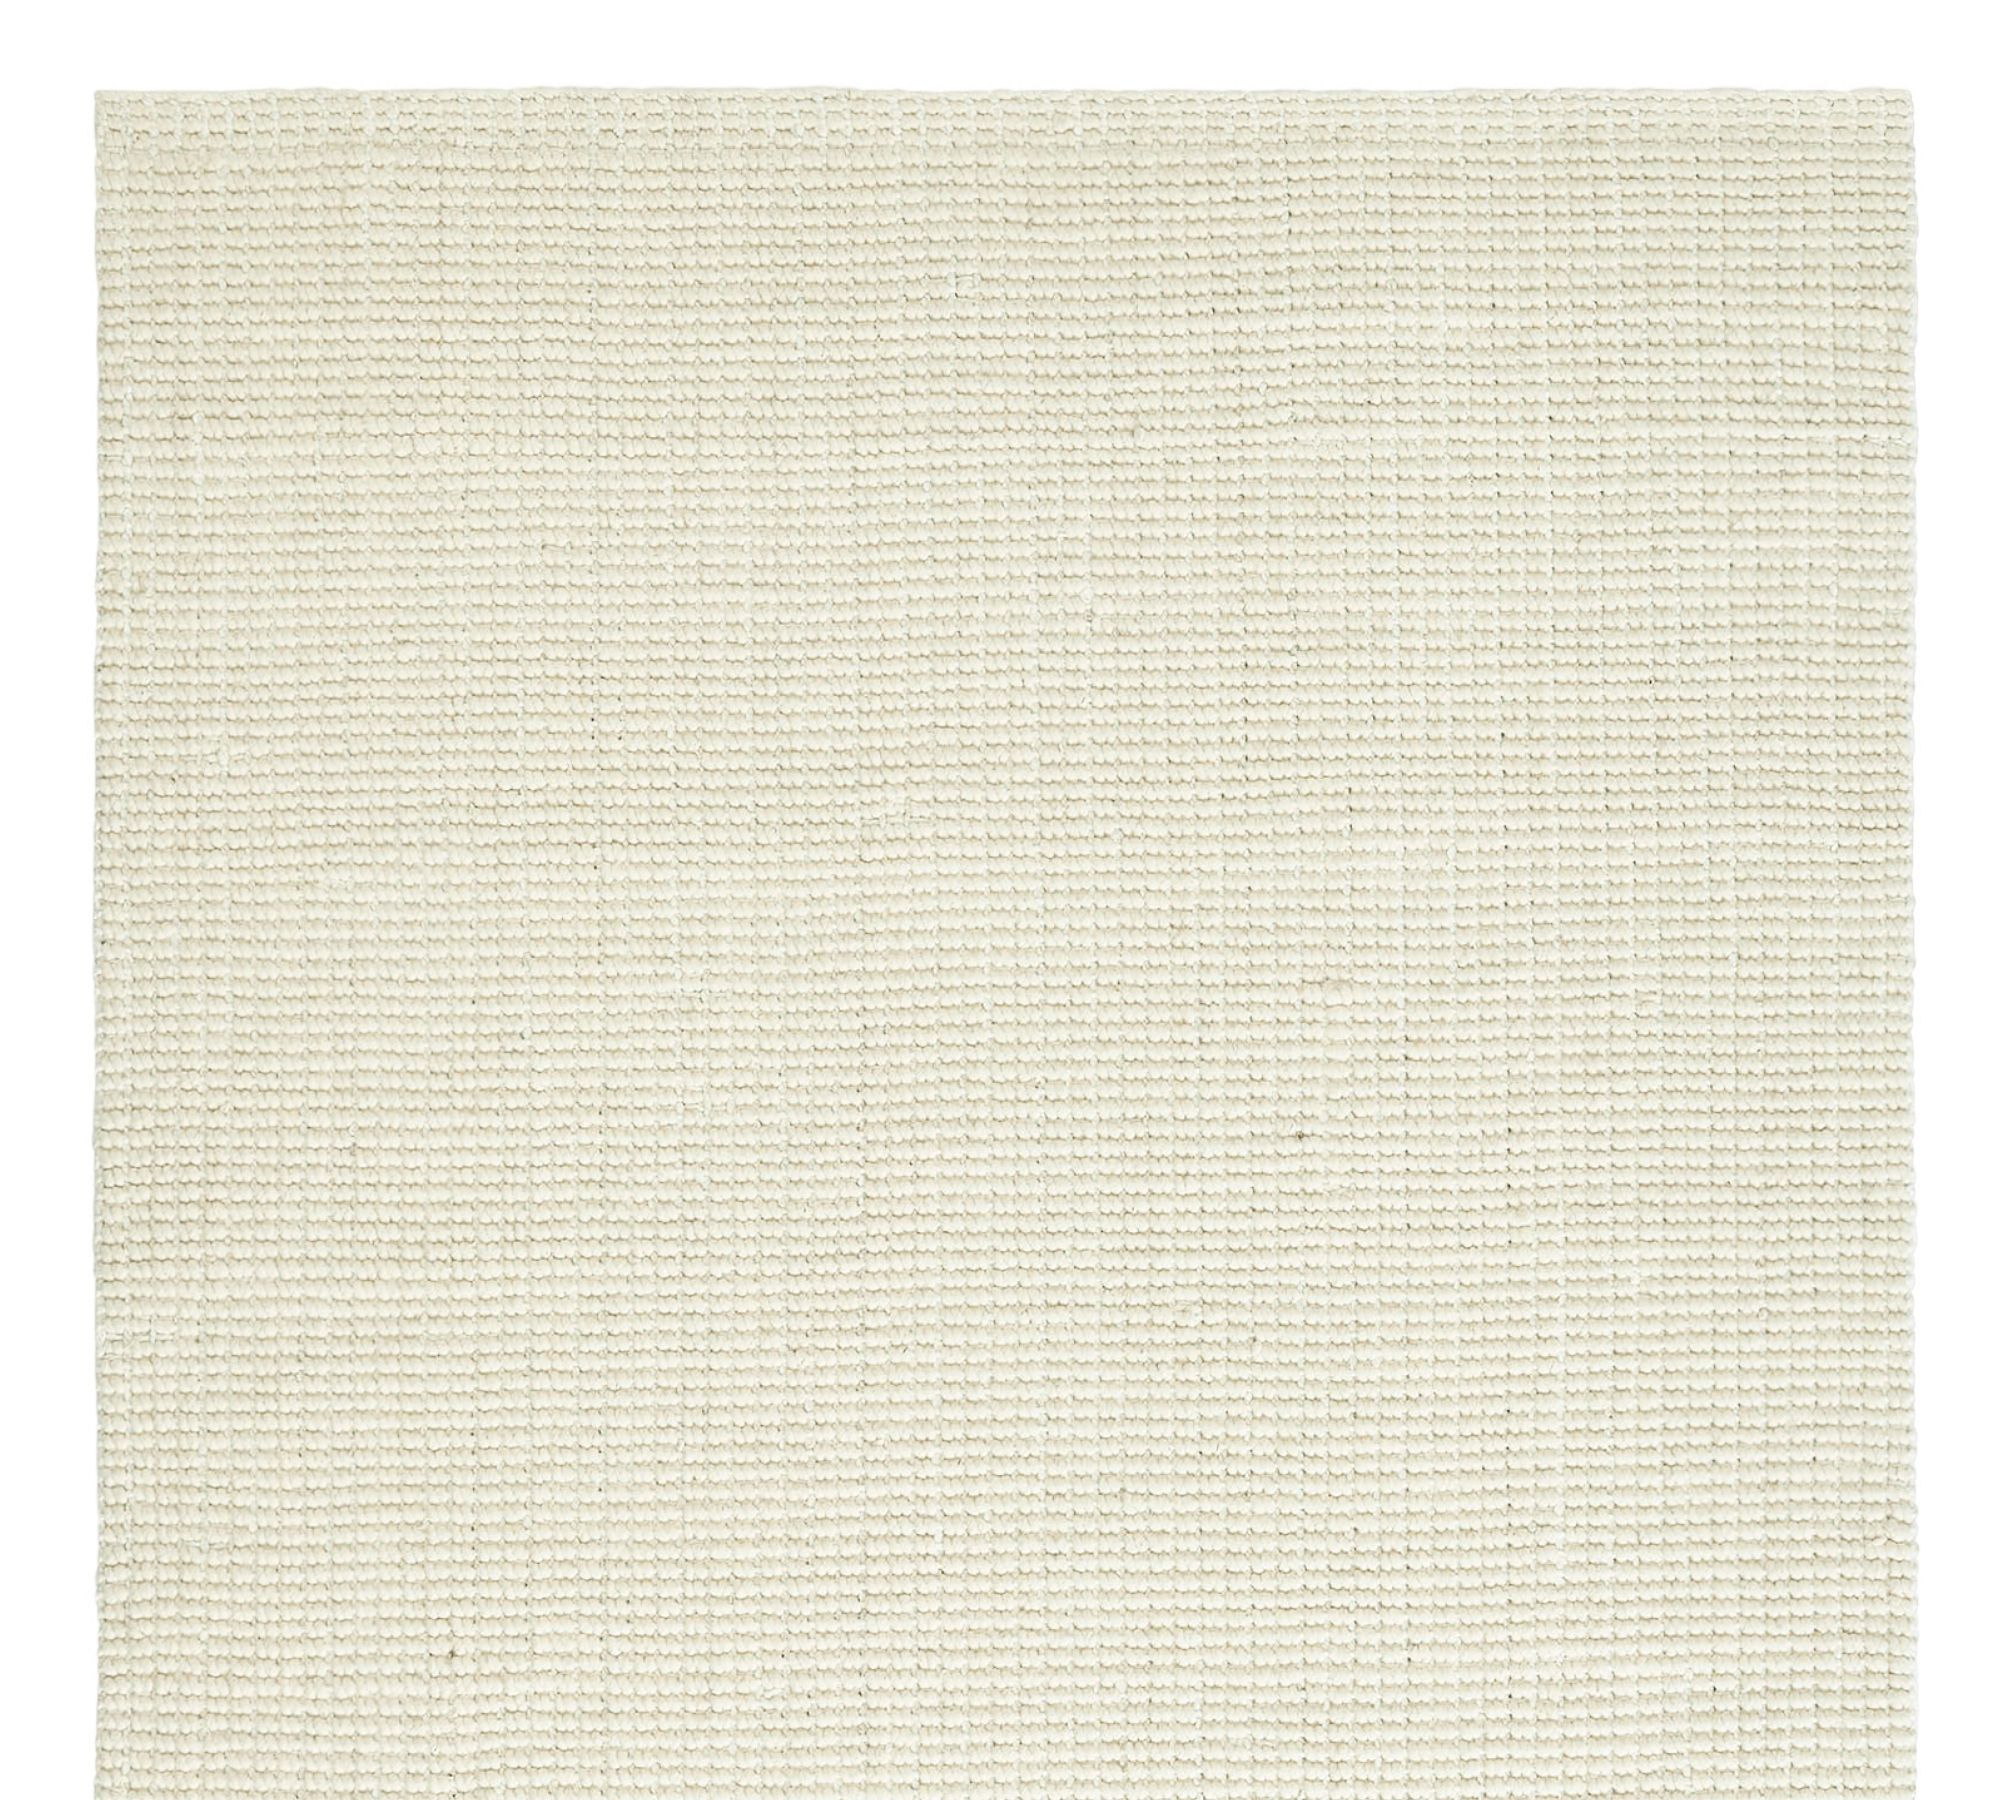 Chunky Wool Jute Rug Swatch - Free Returns Within 30 Days